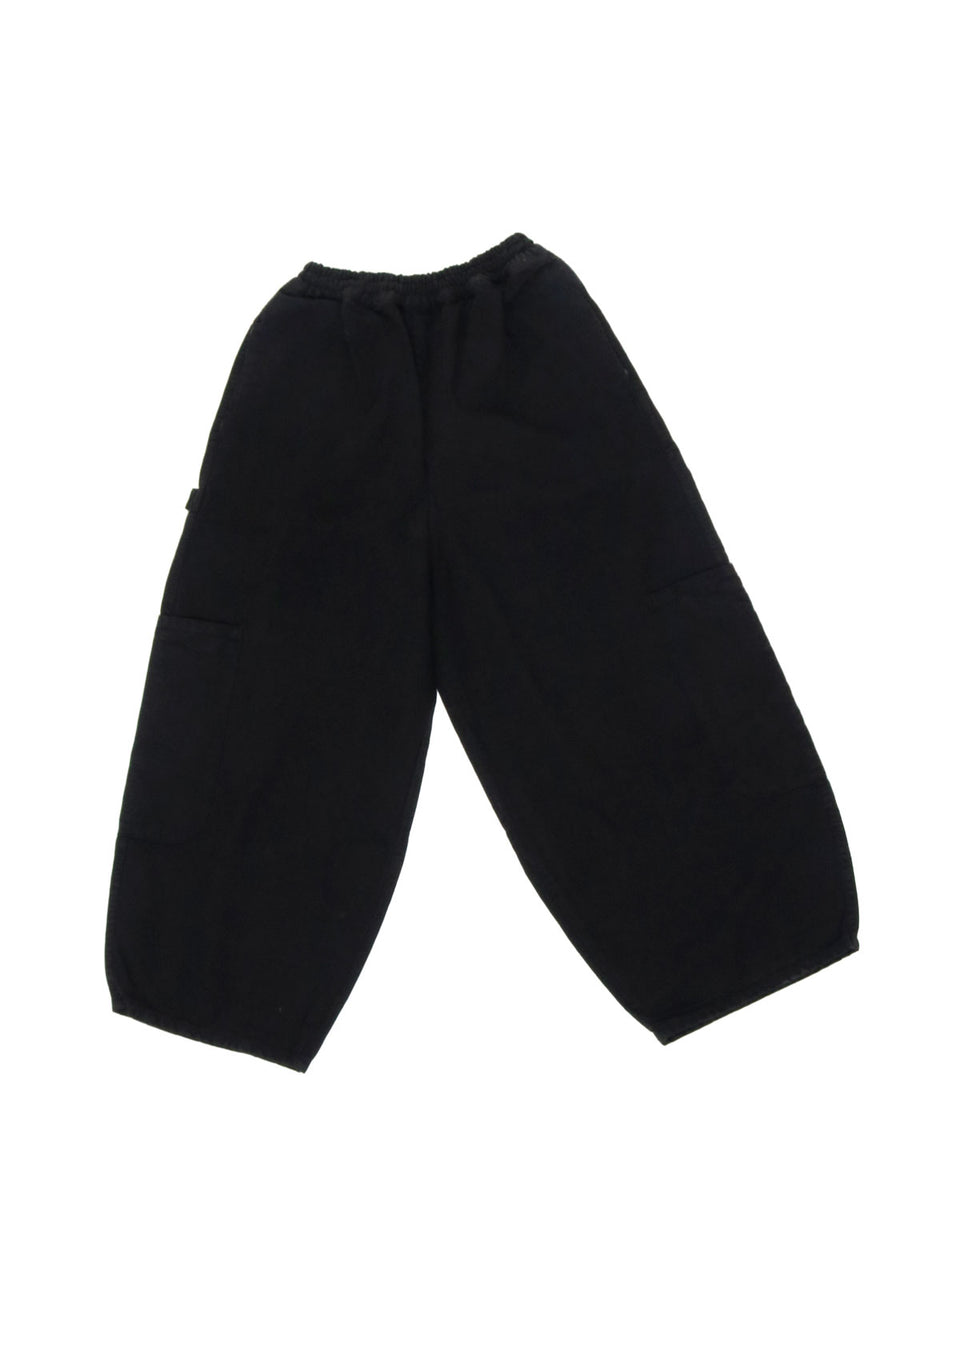 Le Chef Unisex Light Weight Chef Pants Black - P_BB148 - Buy Online at  Nisbets